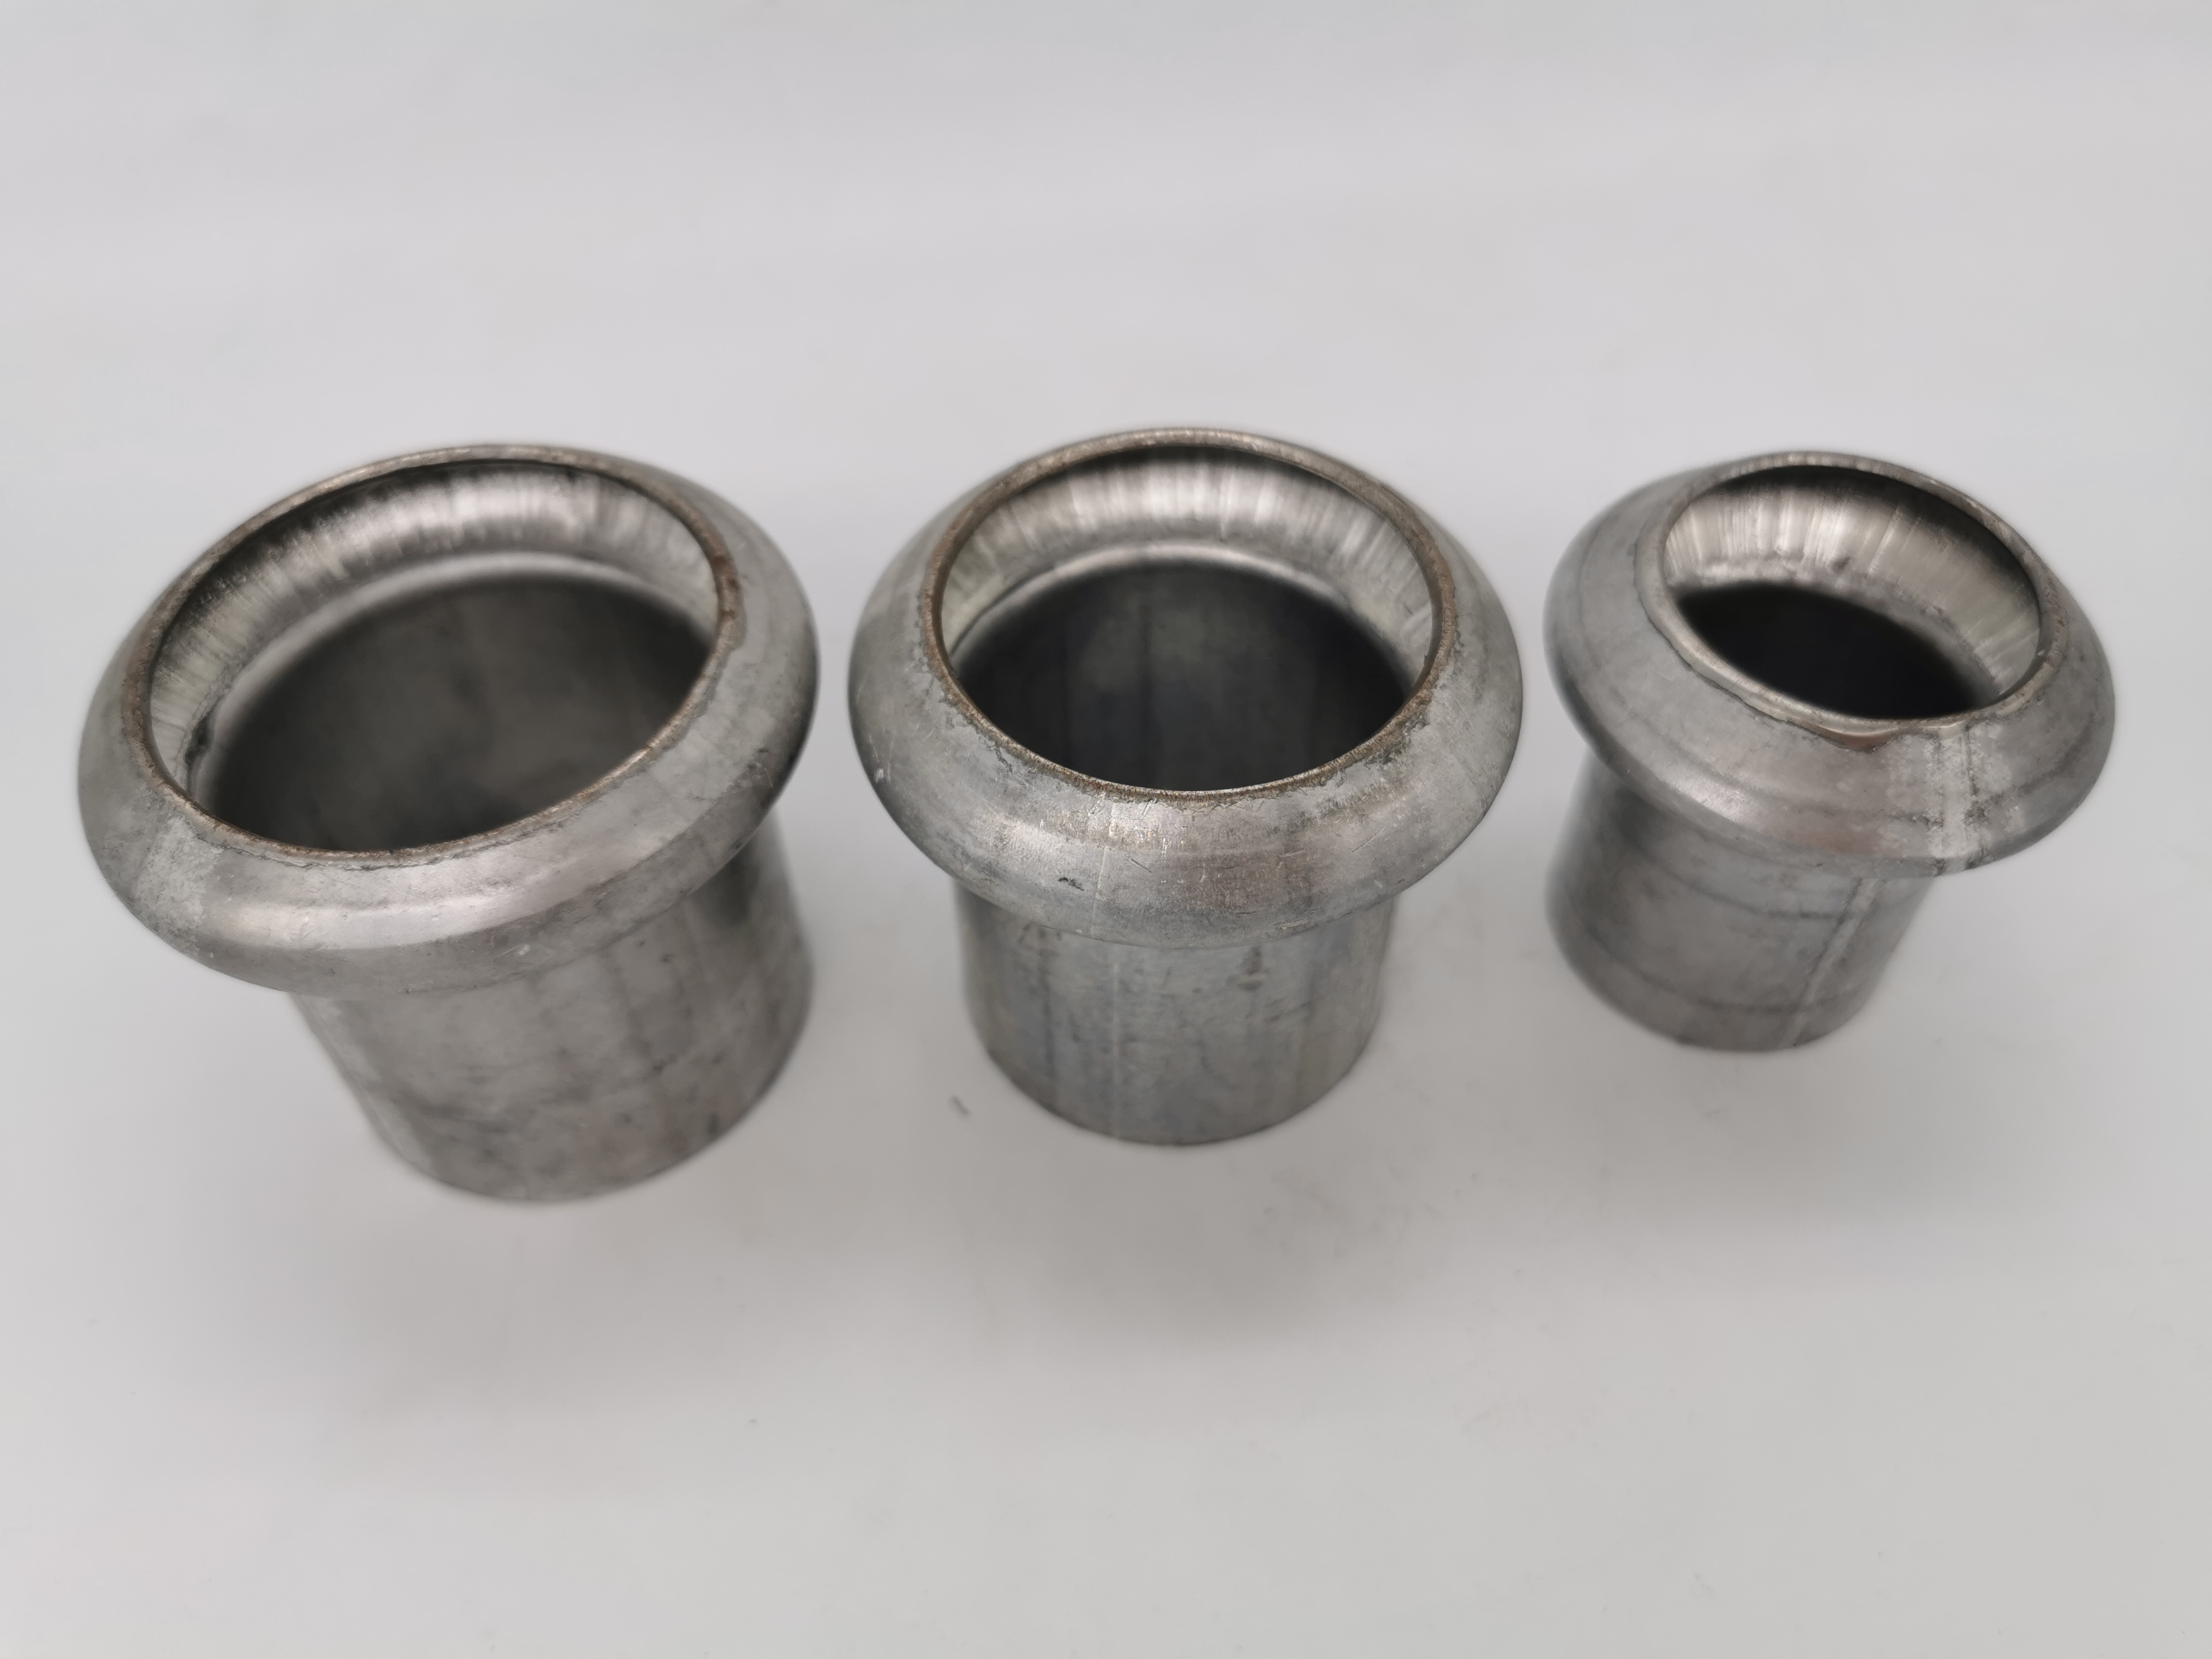 Customized metal tube ends